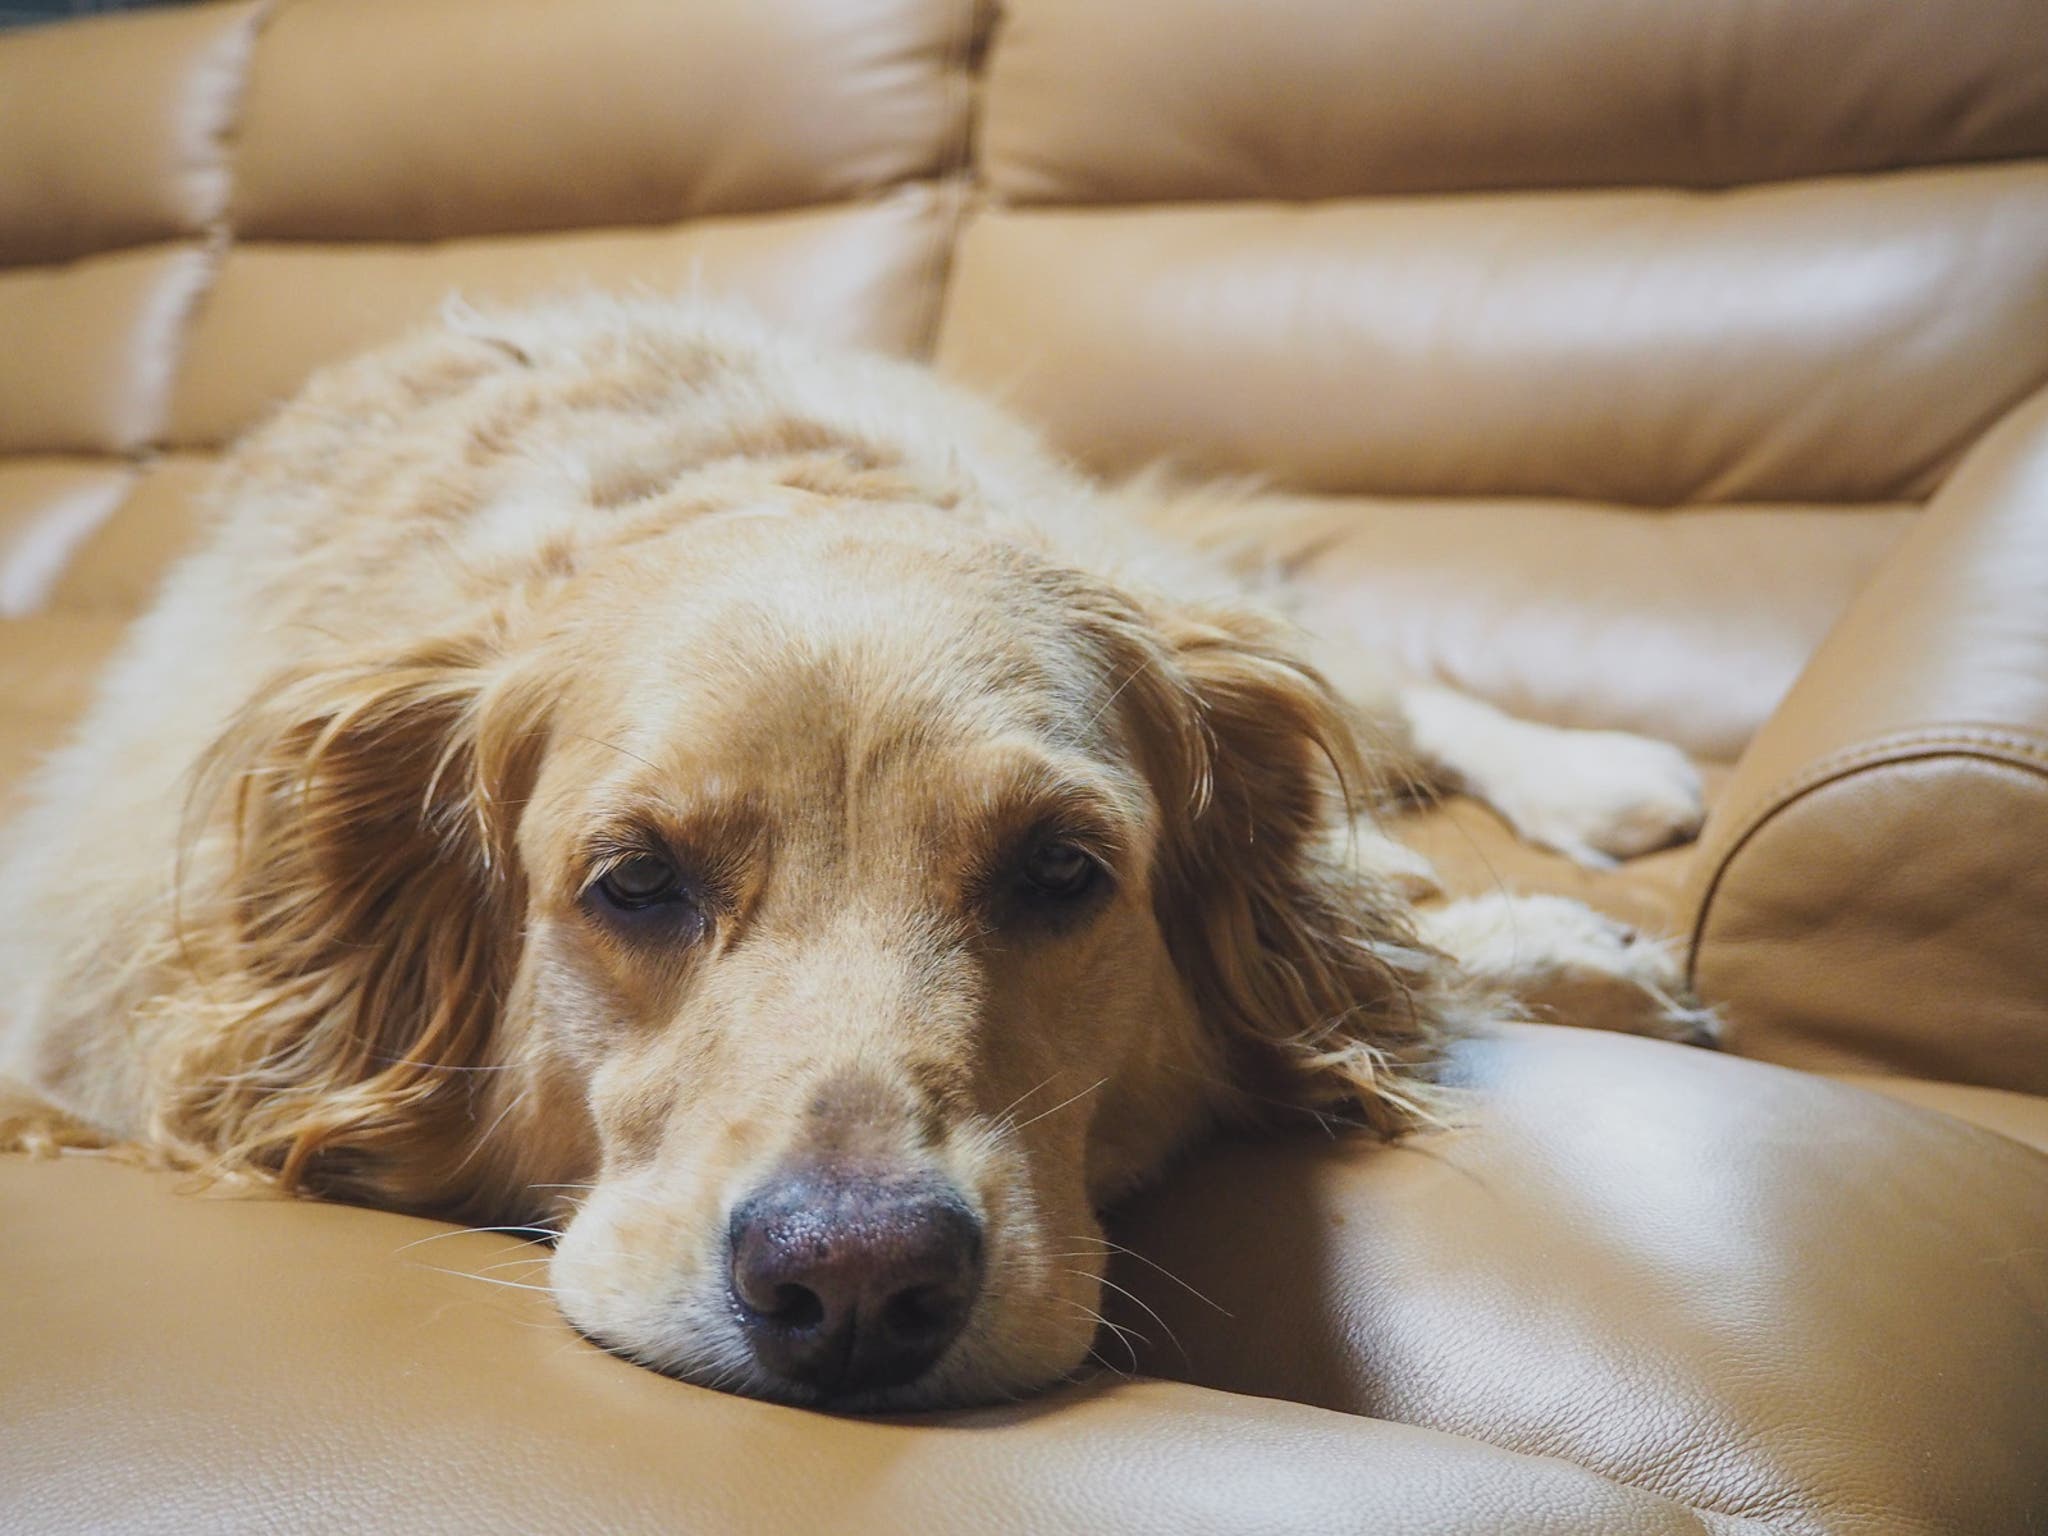 How Can You Tell If Your Dog Has Valley Fever?